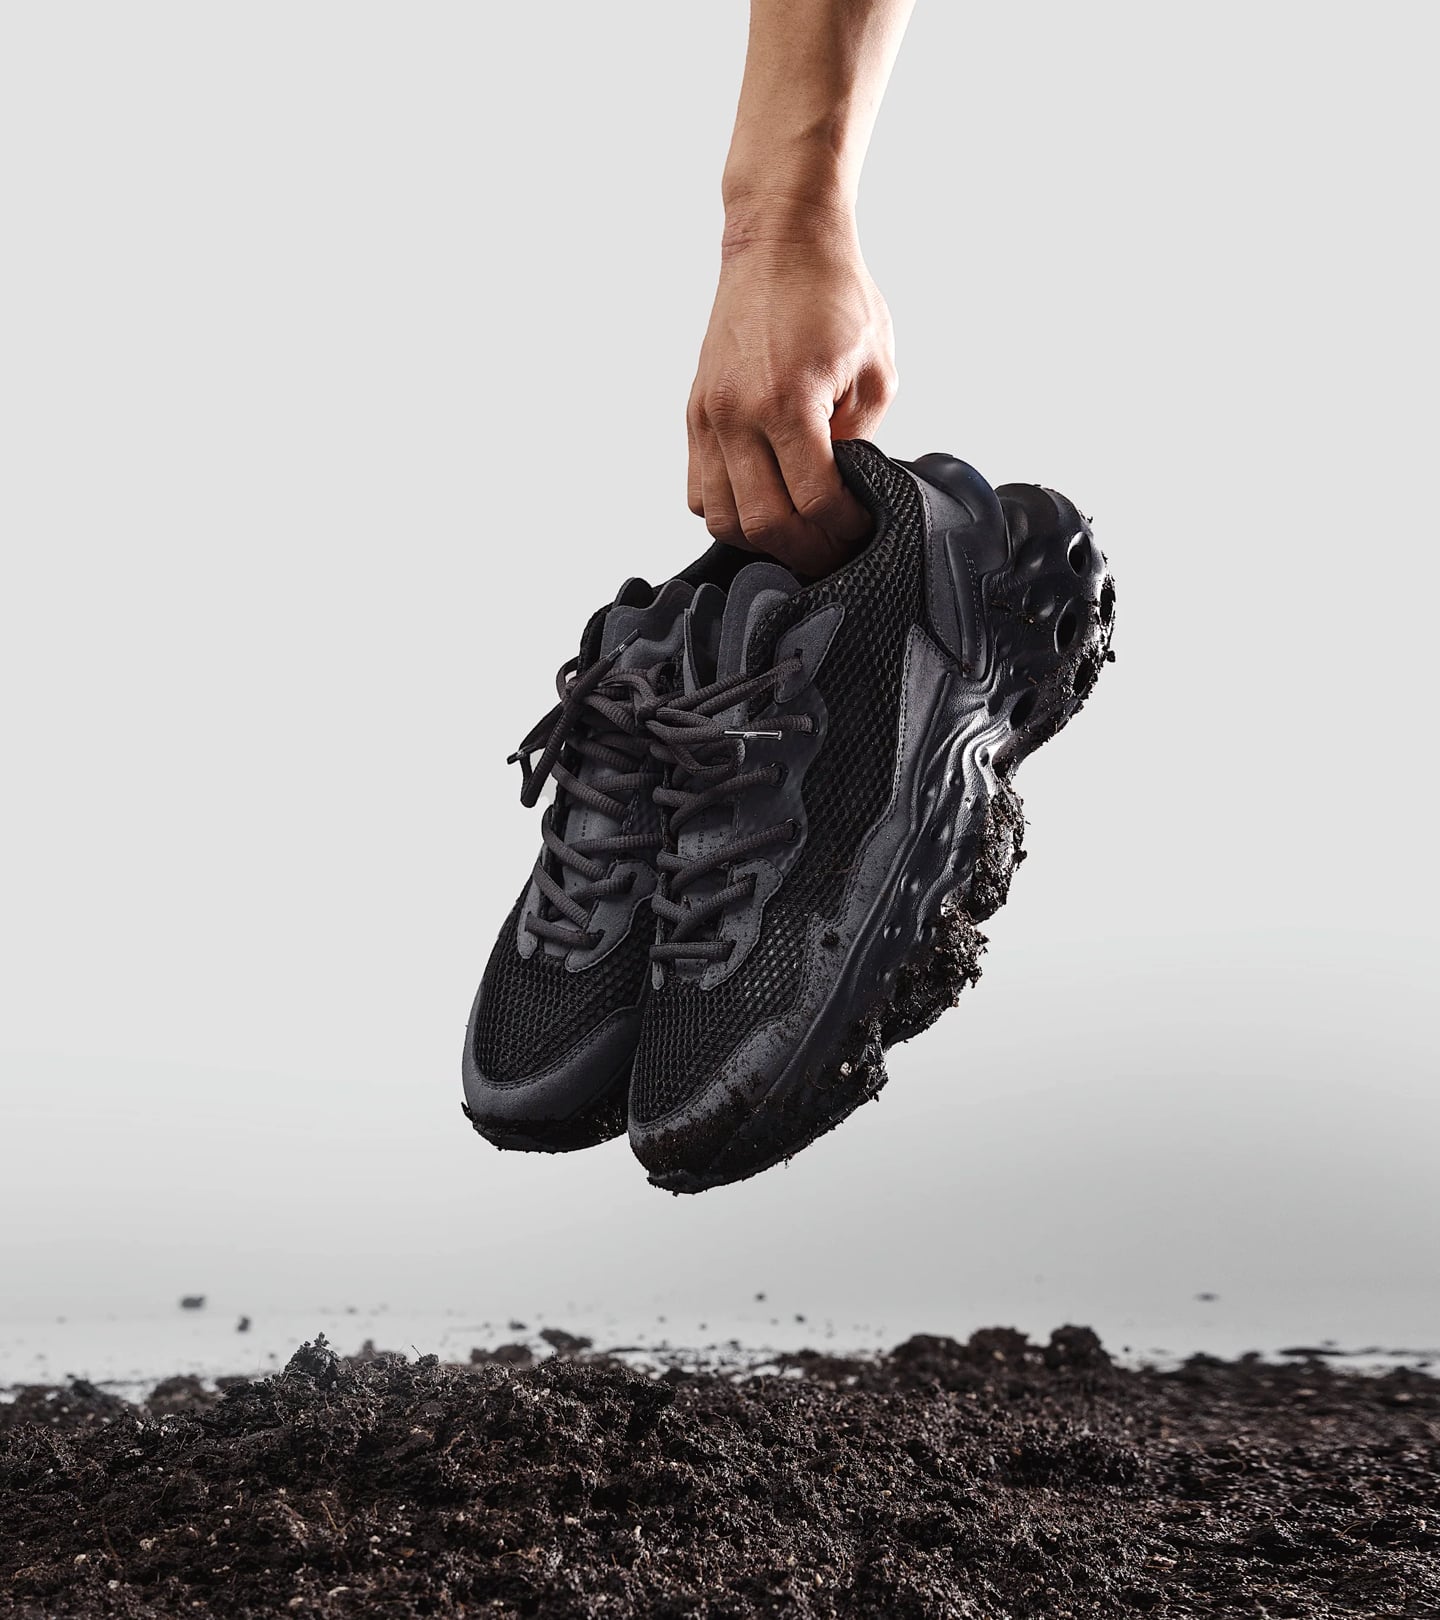 A hand hanging down from above holding a pair of Seed.One Black Mud above a pile of soil on a gray background